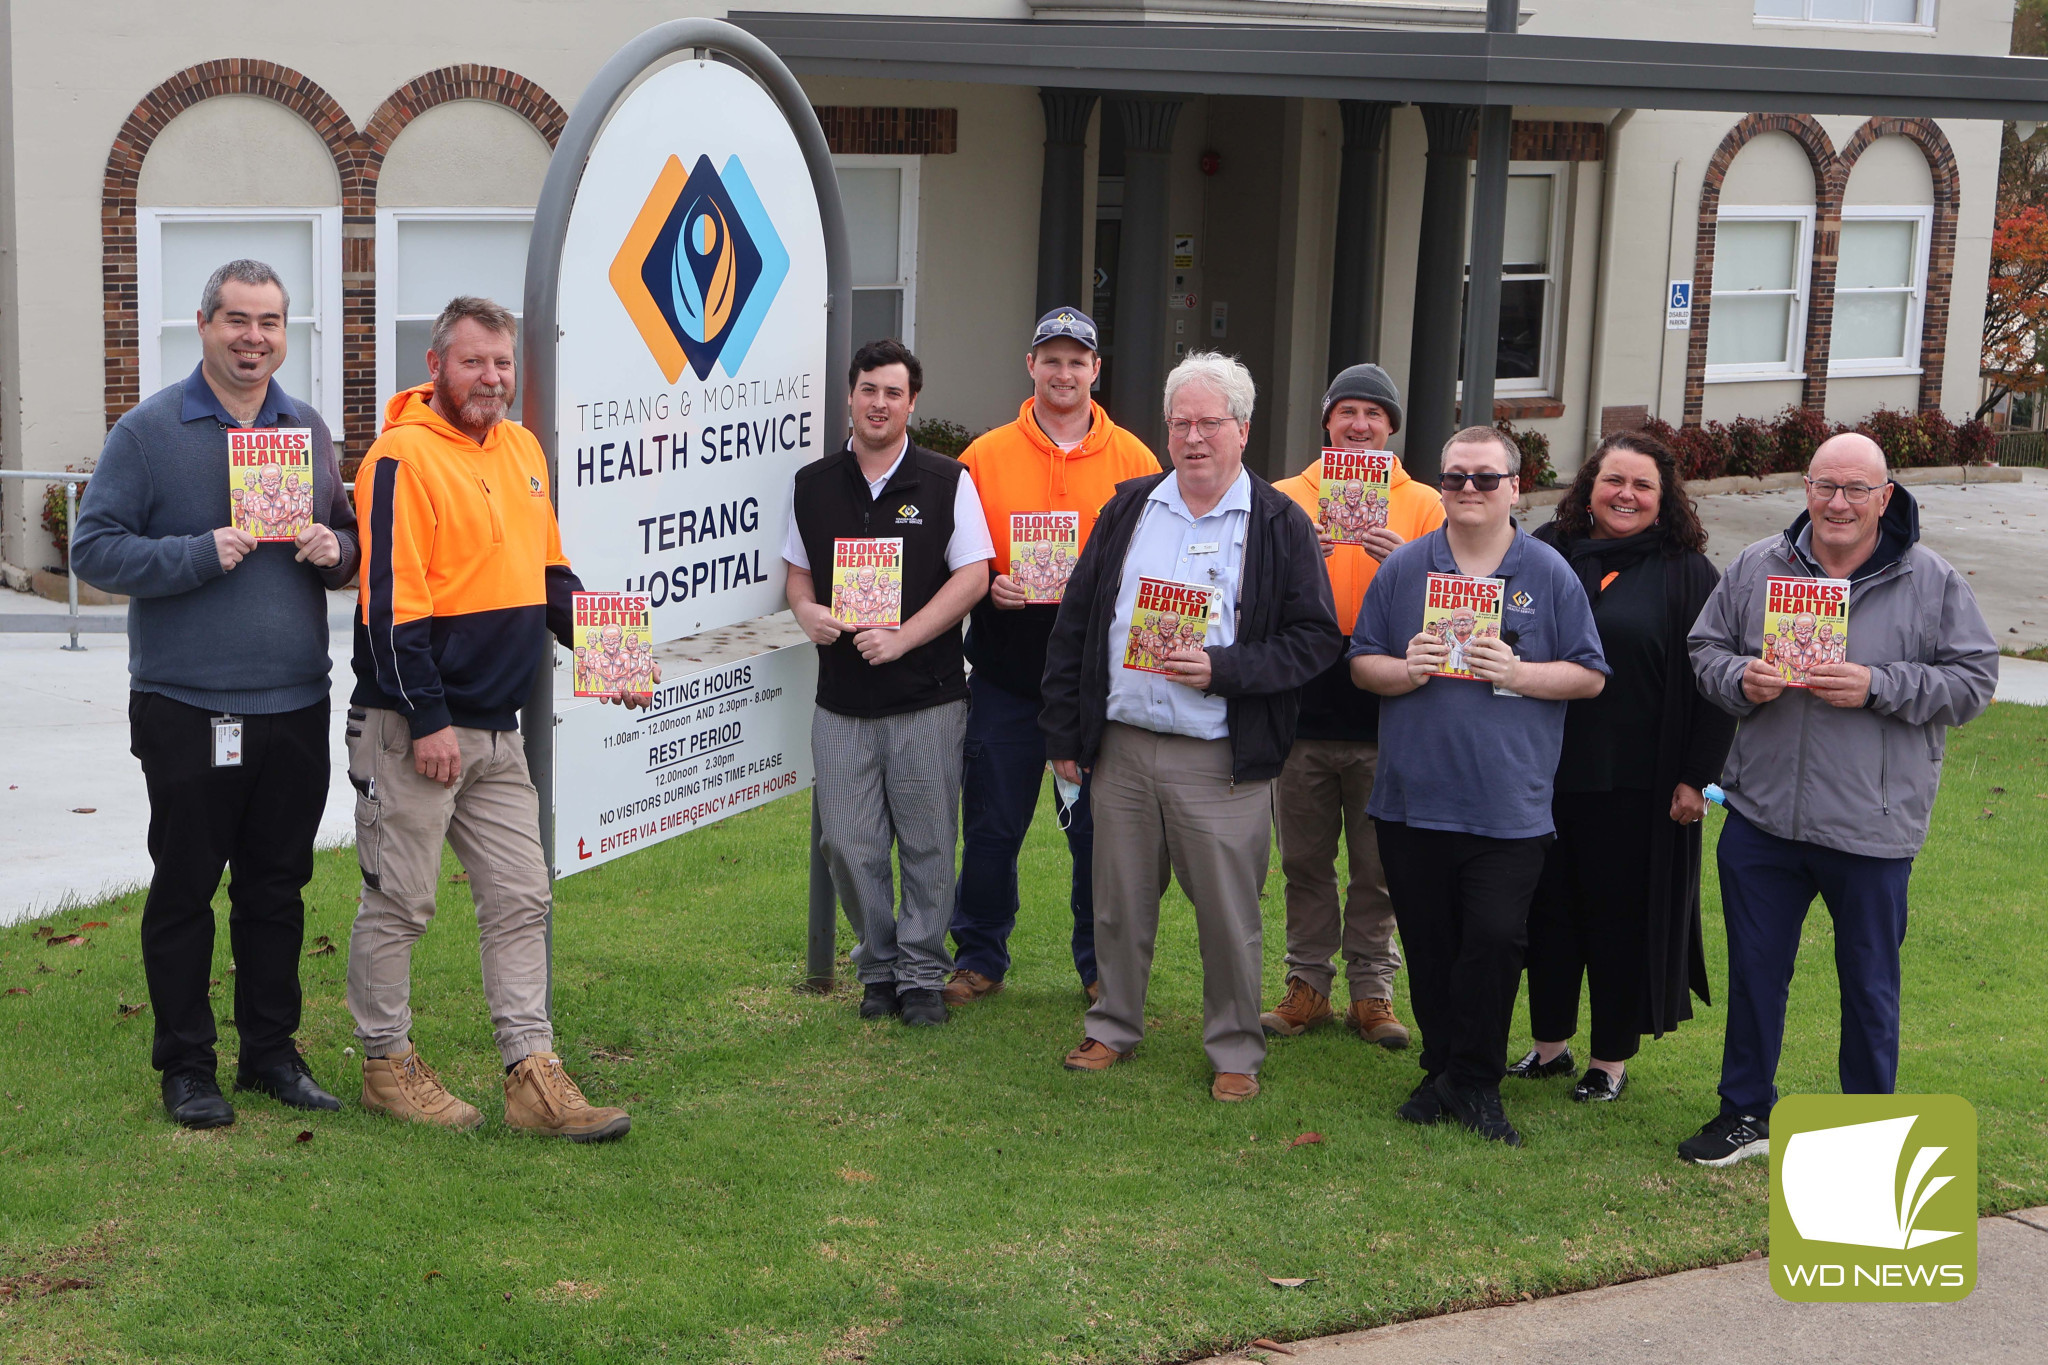 Thank you: Terang and Mortlake Health Service this week presented a gift to male staff to recognise their dedication, and the importance of their health, as part of International Men’s Health Week.